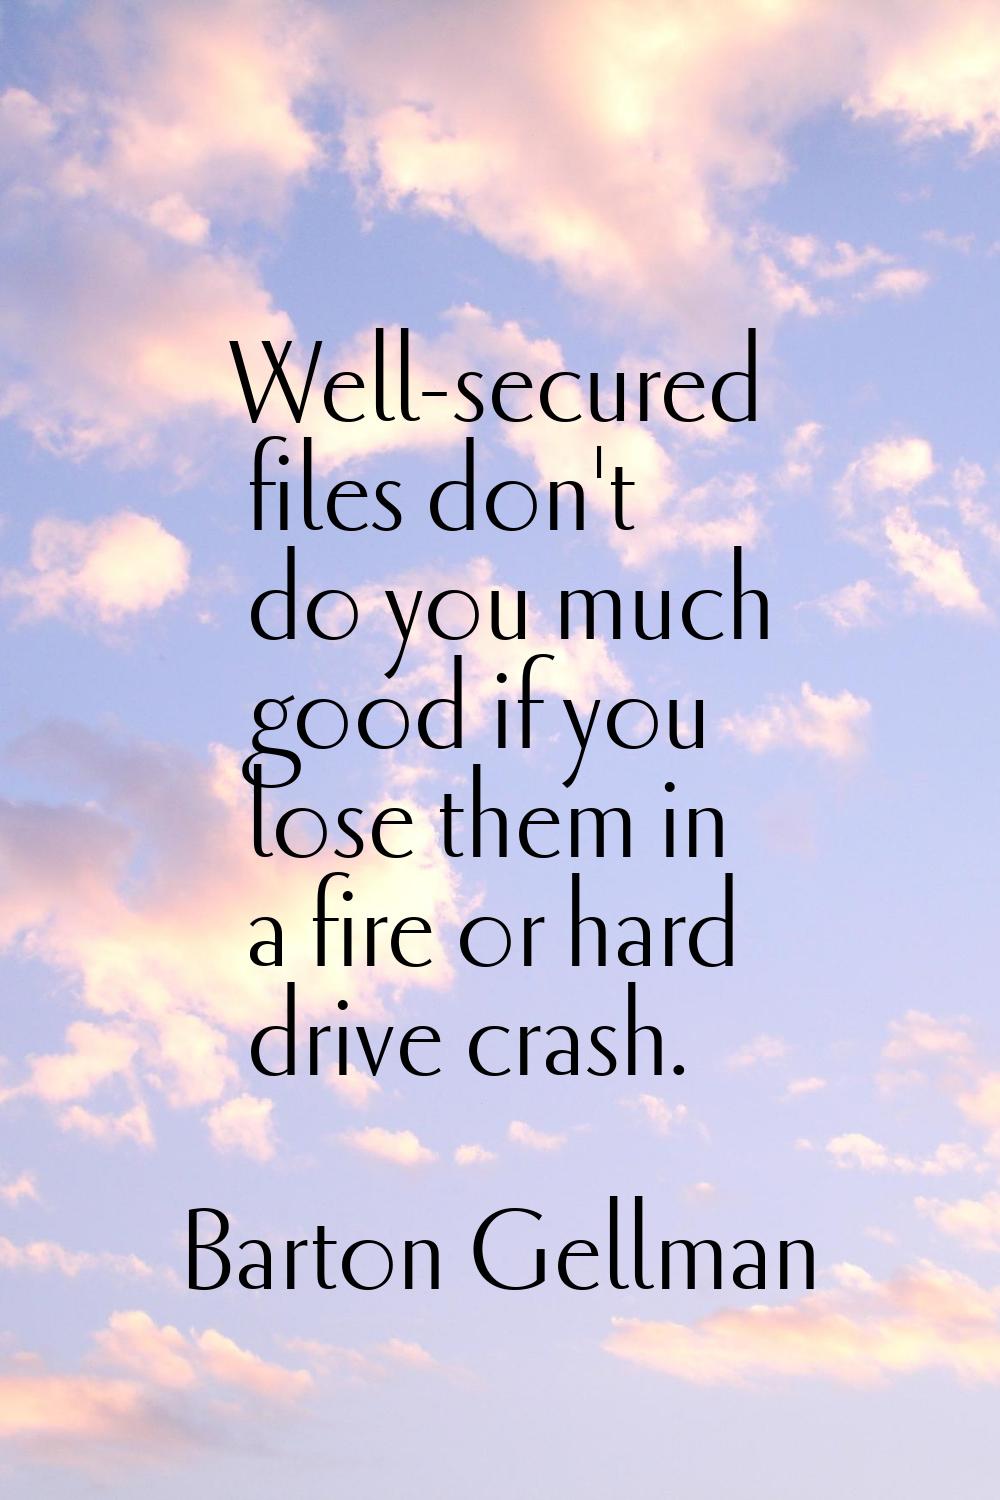 Well-secured files don't do you much good if you lose them in a fire or hard drive crash.